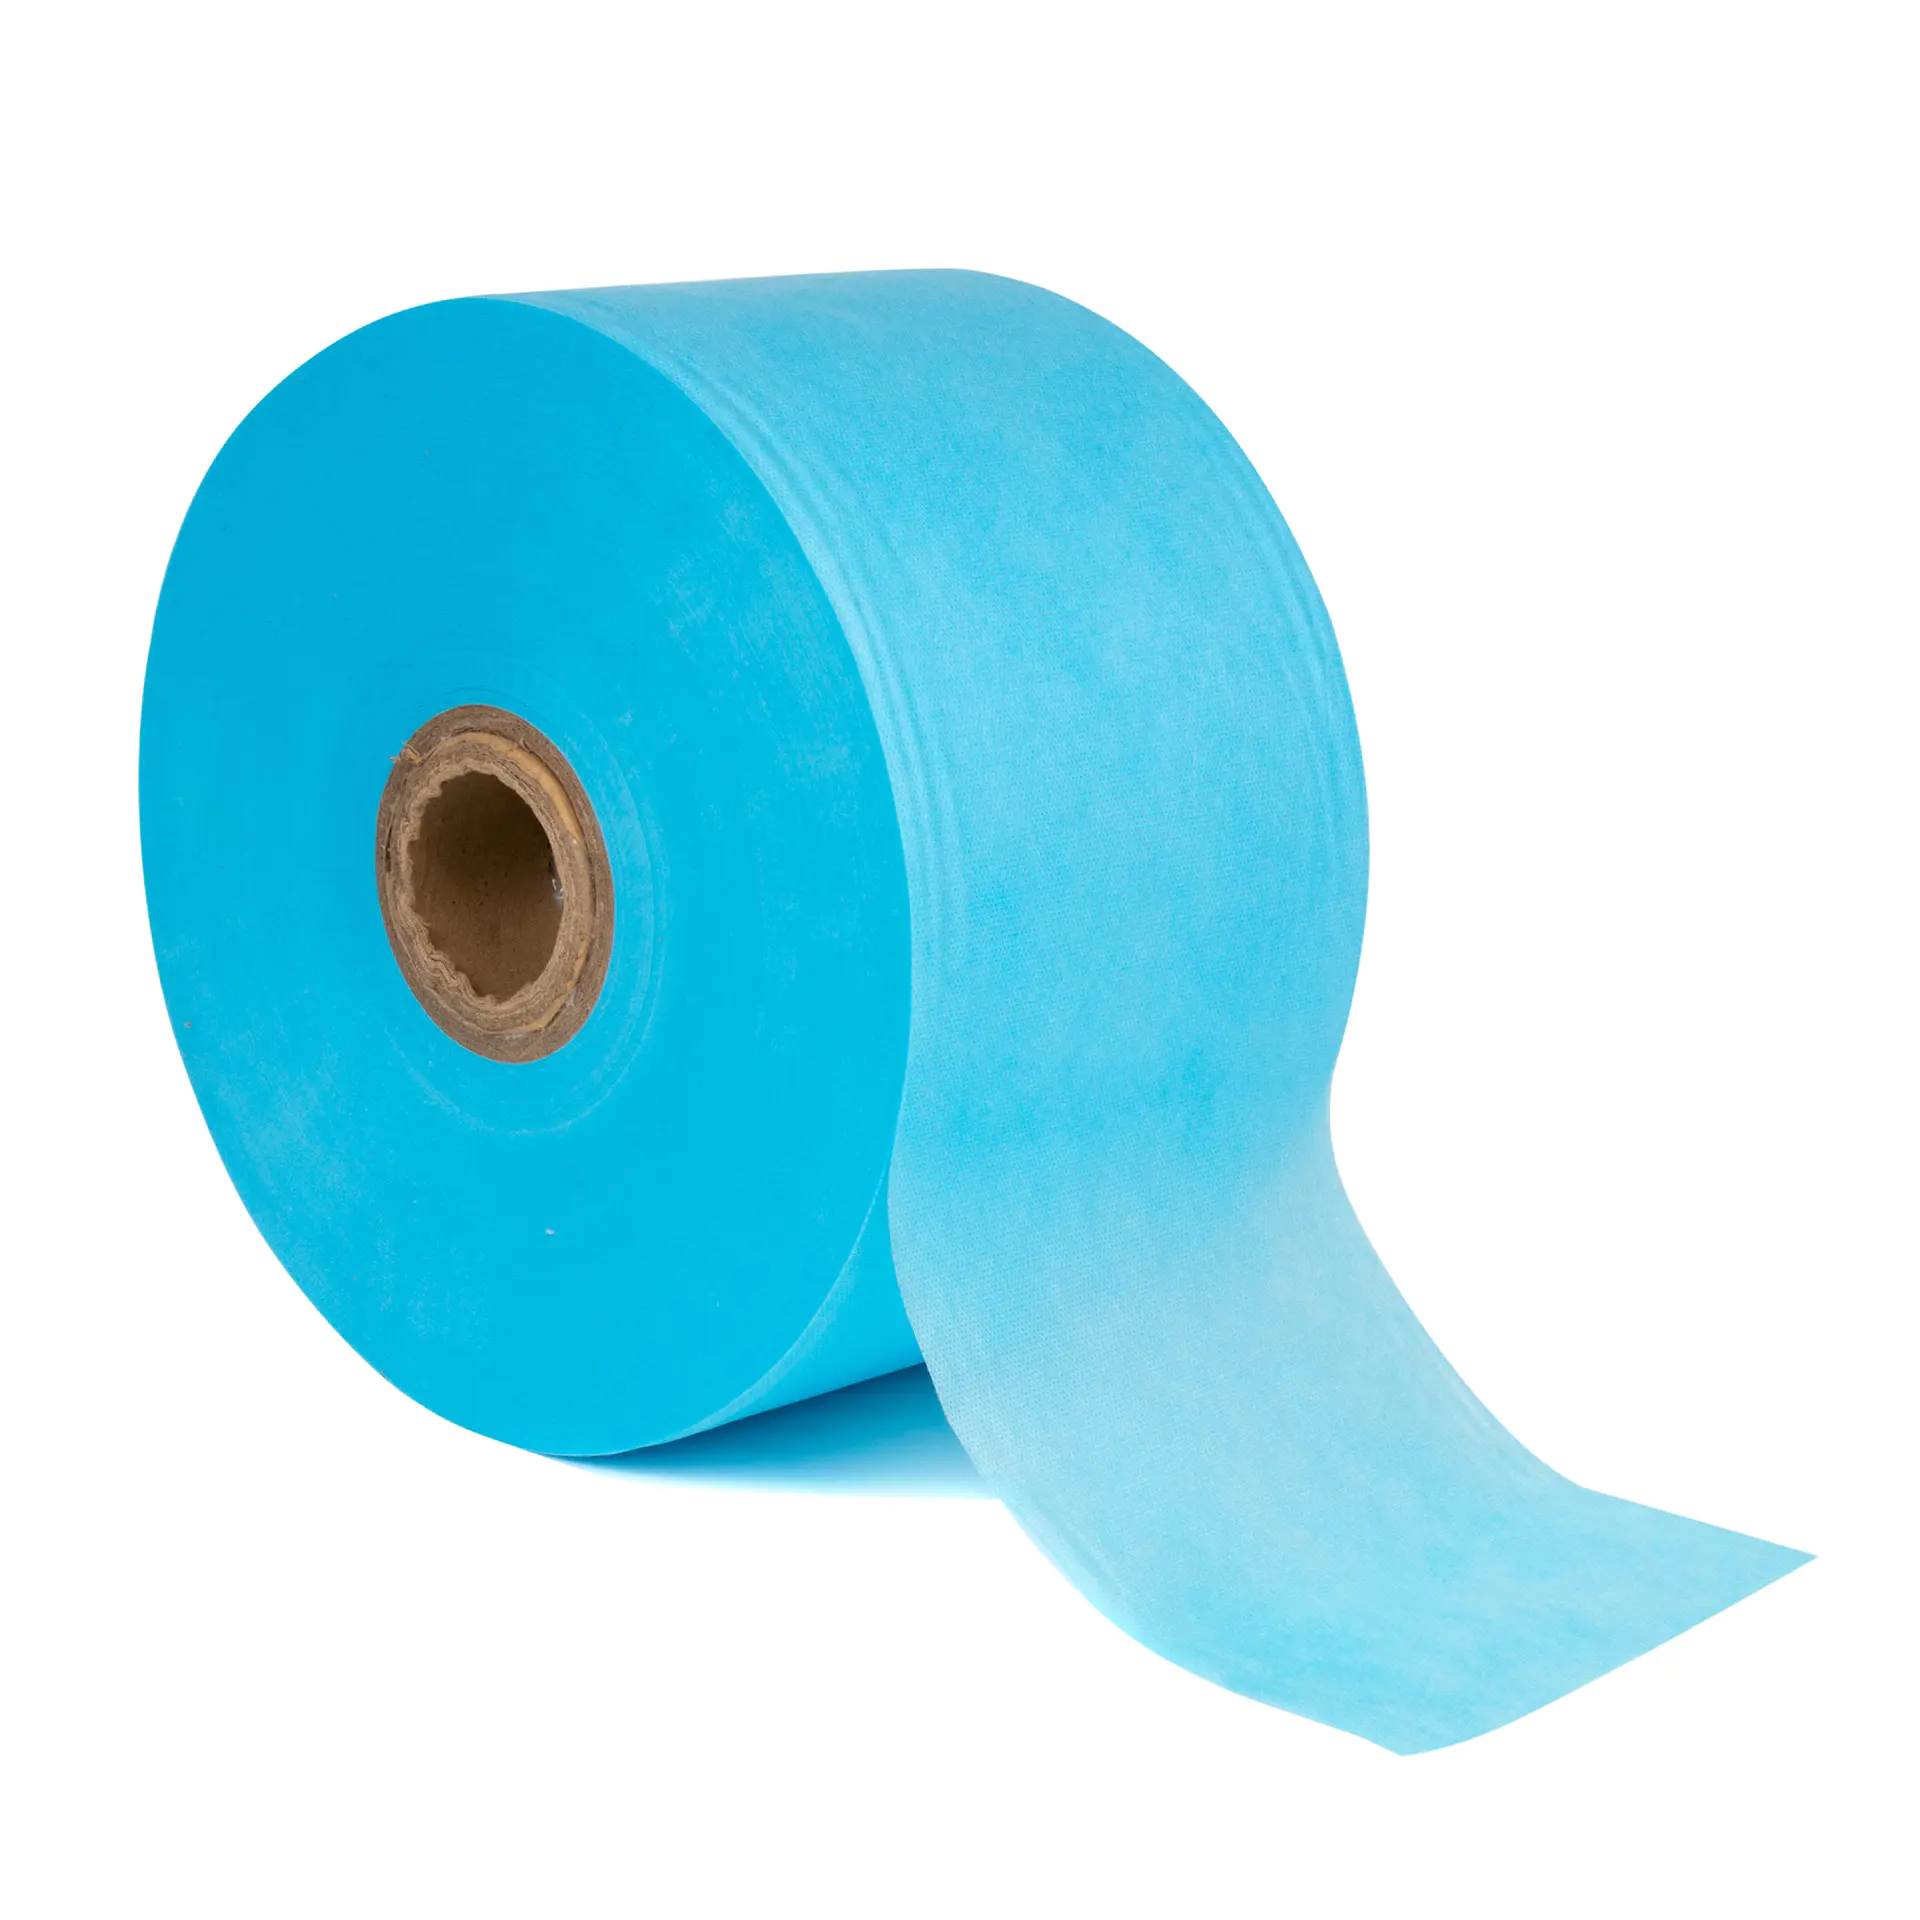 Biodegradable medical mask 100% pp nonwoven fabric